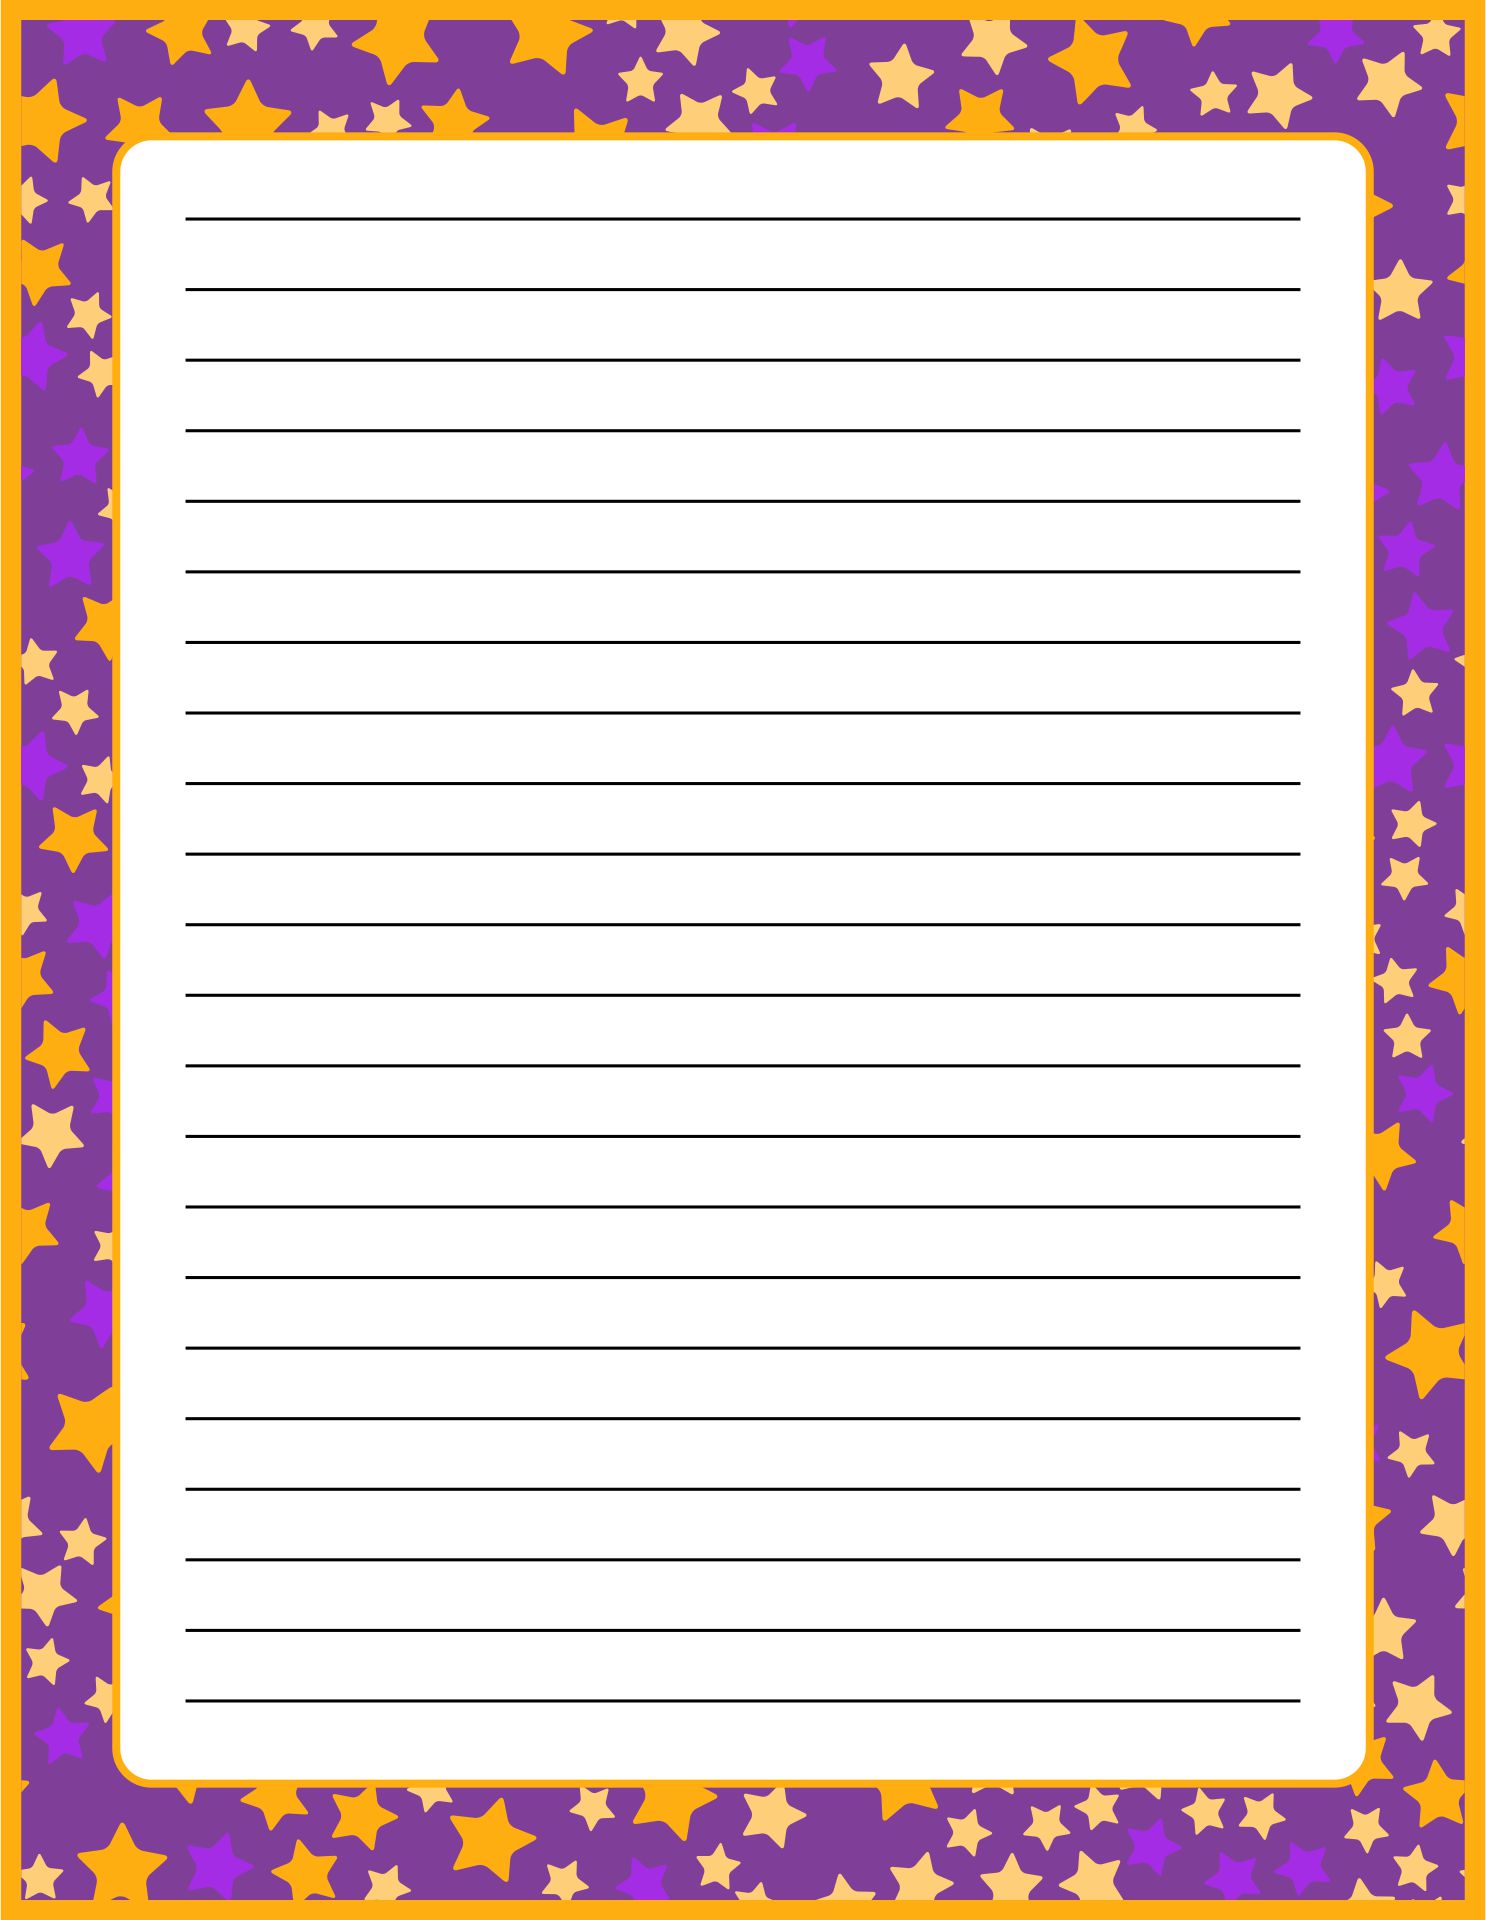 Printable Writing Paper With Star Border